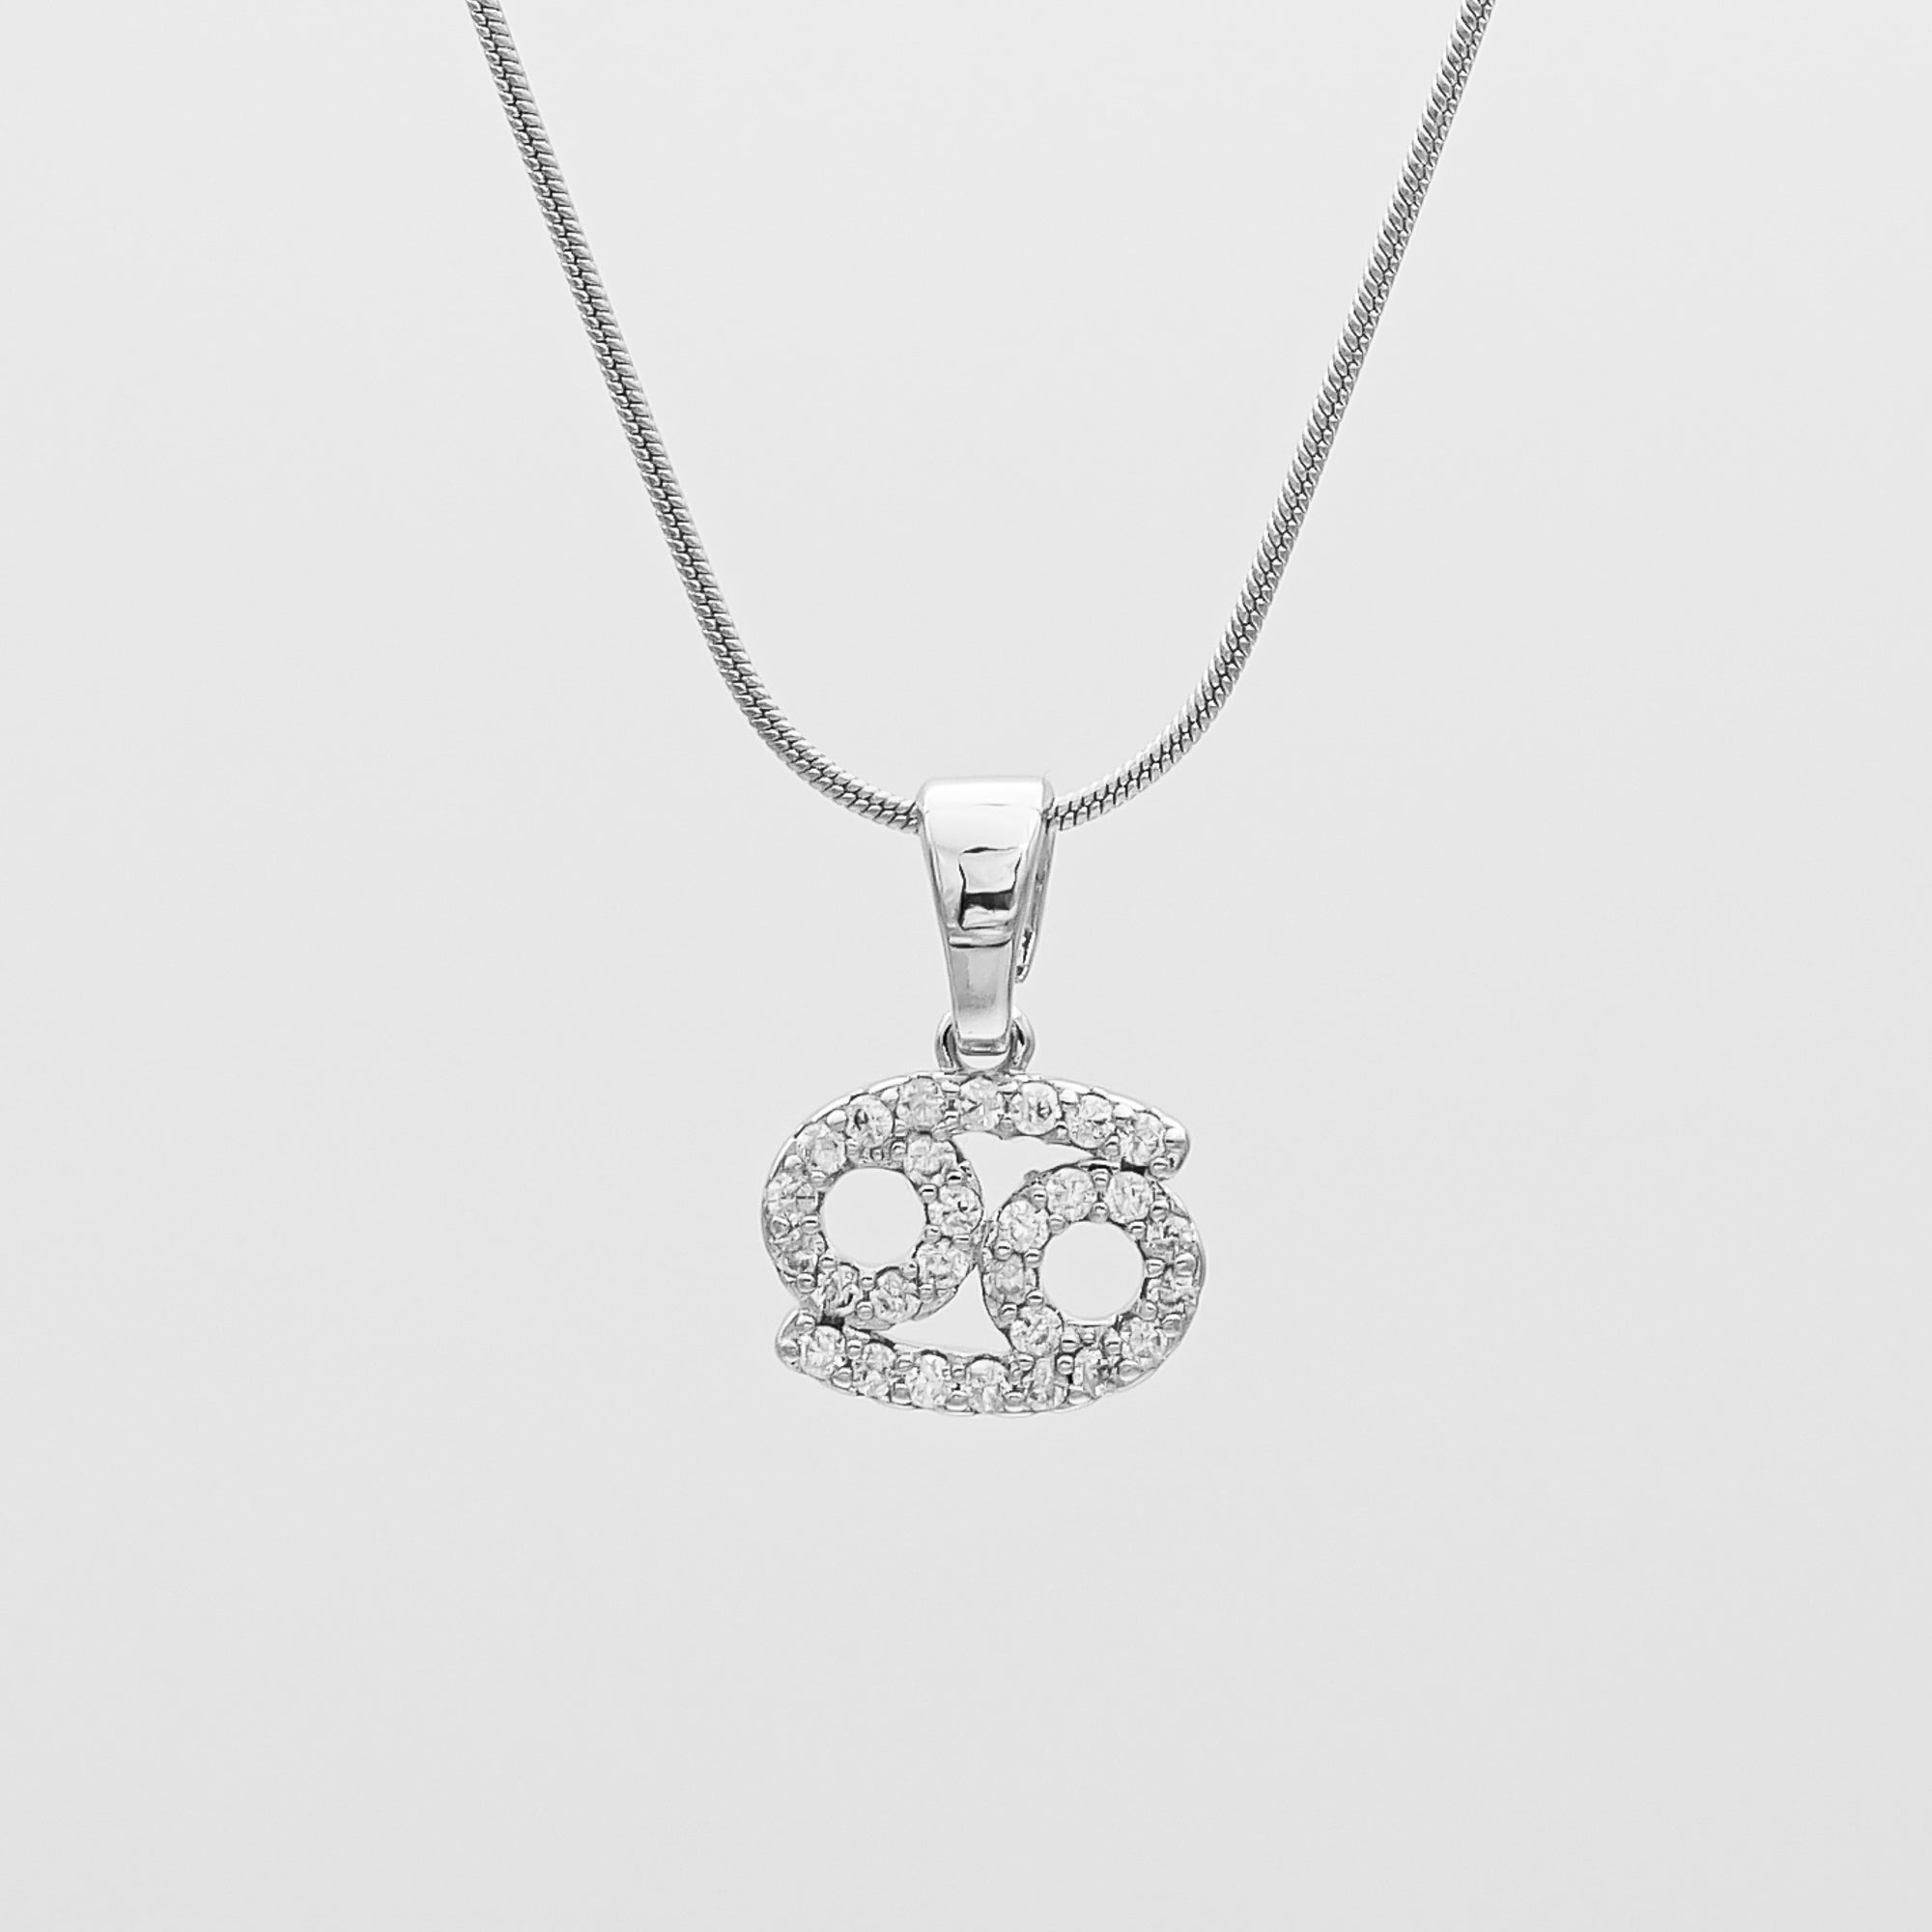 Silver ICY Zodiac Cancer Symbol Pendant Necklace by PRYA